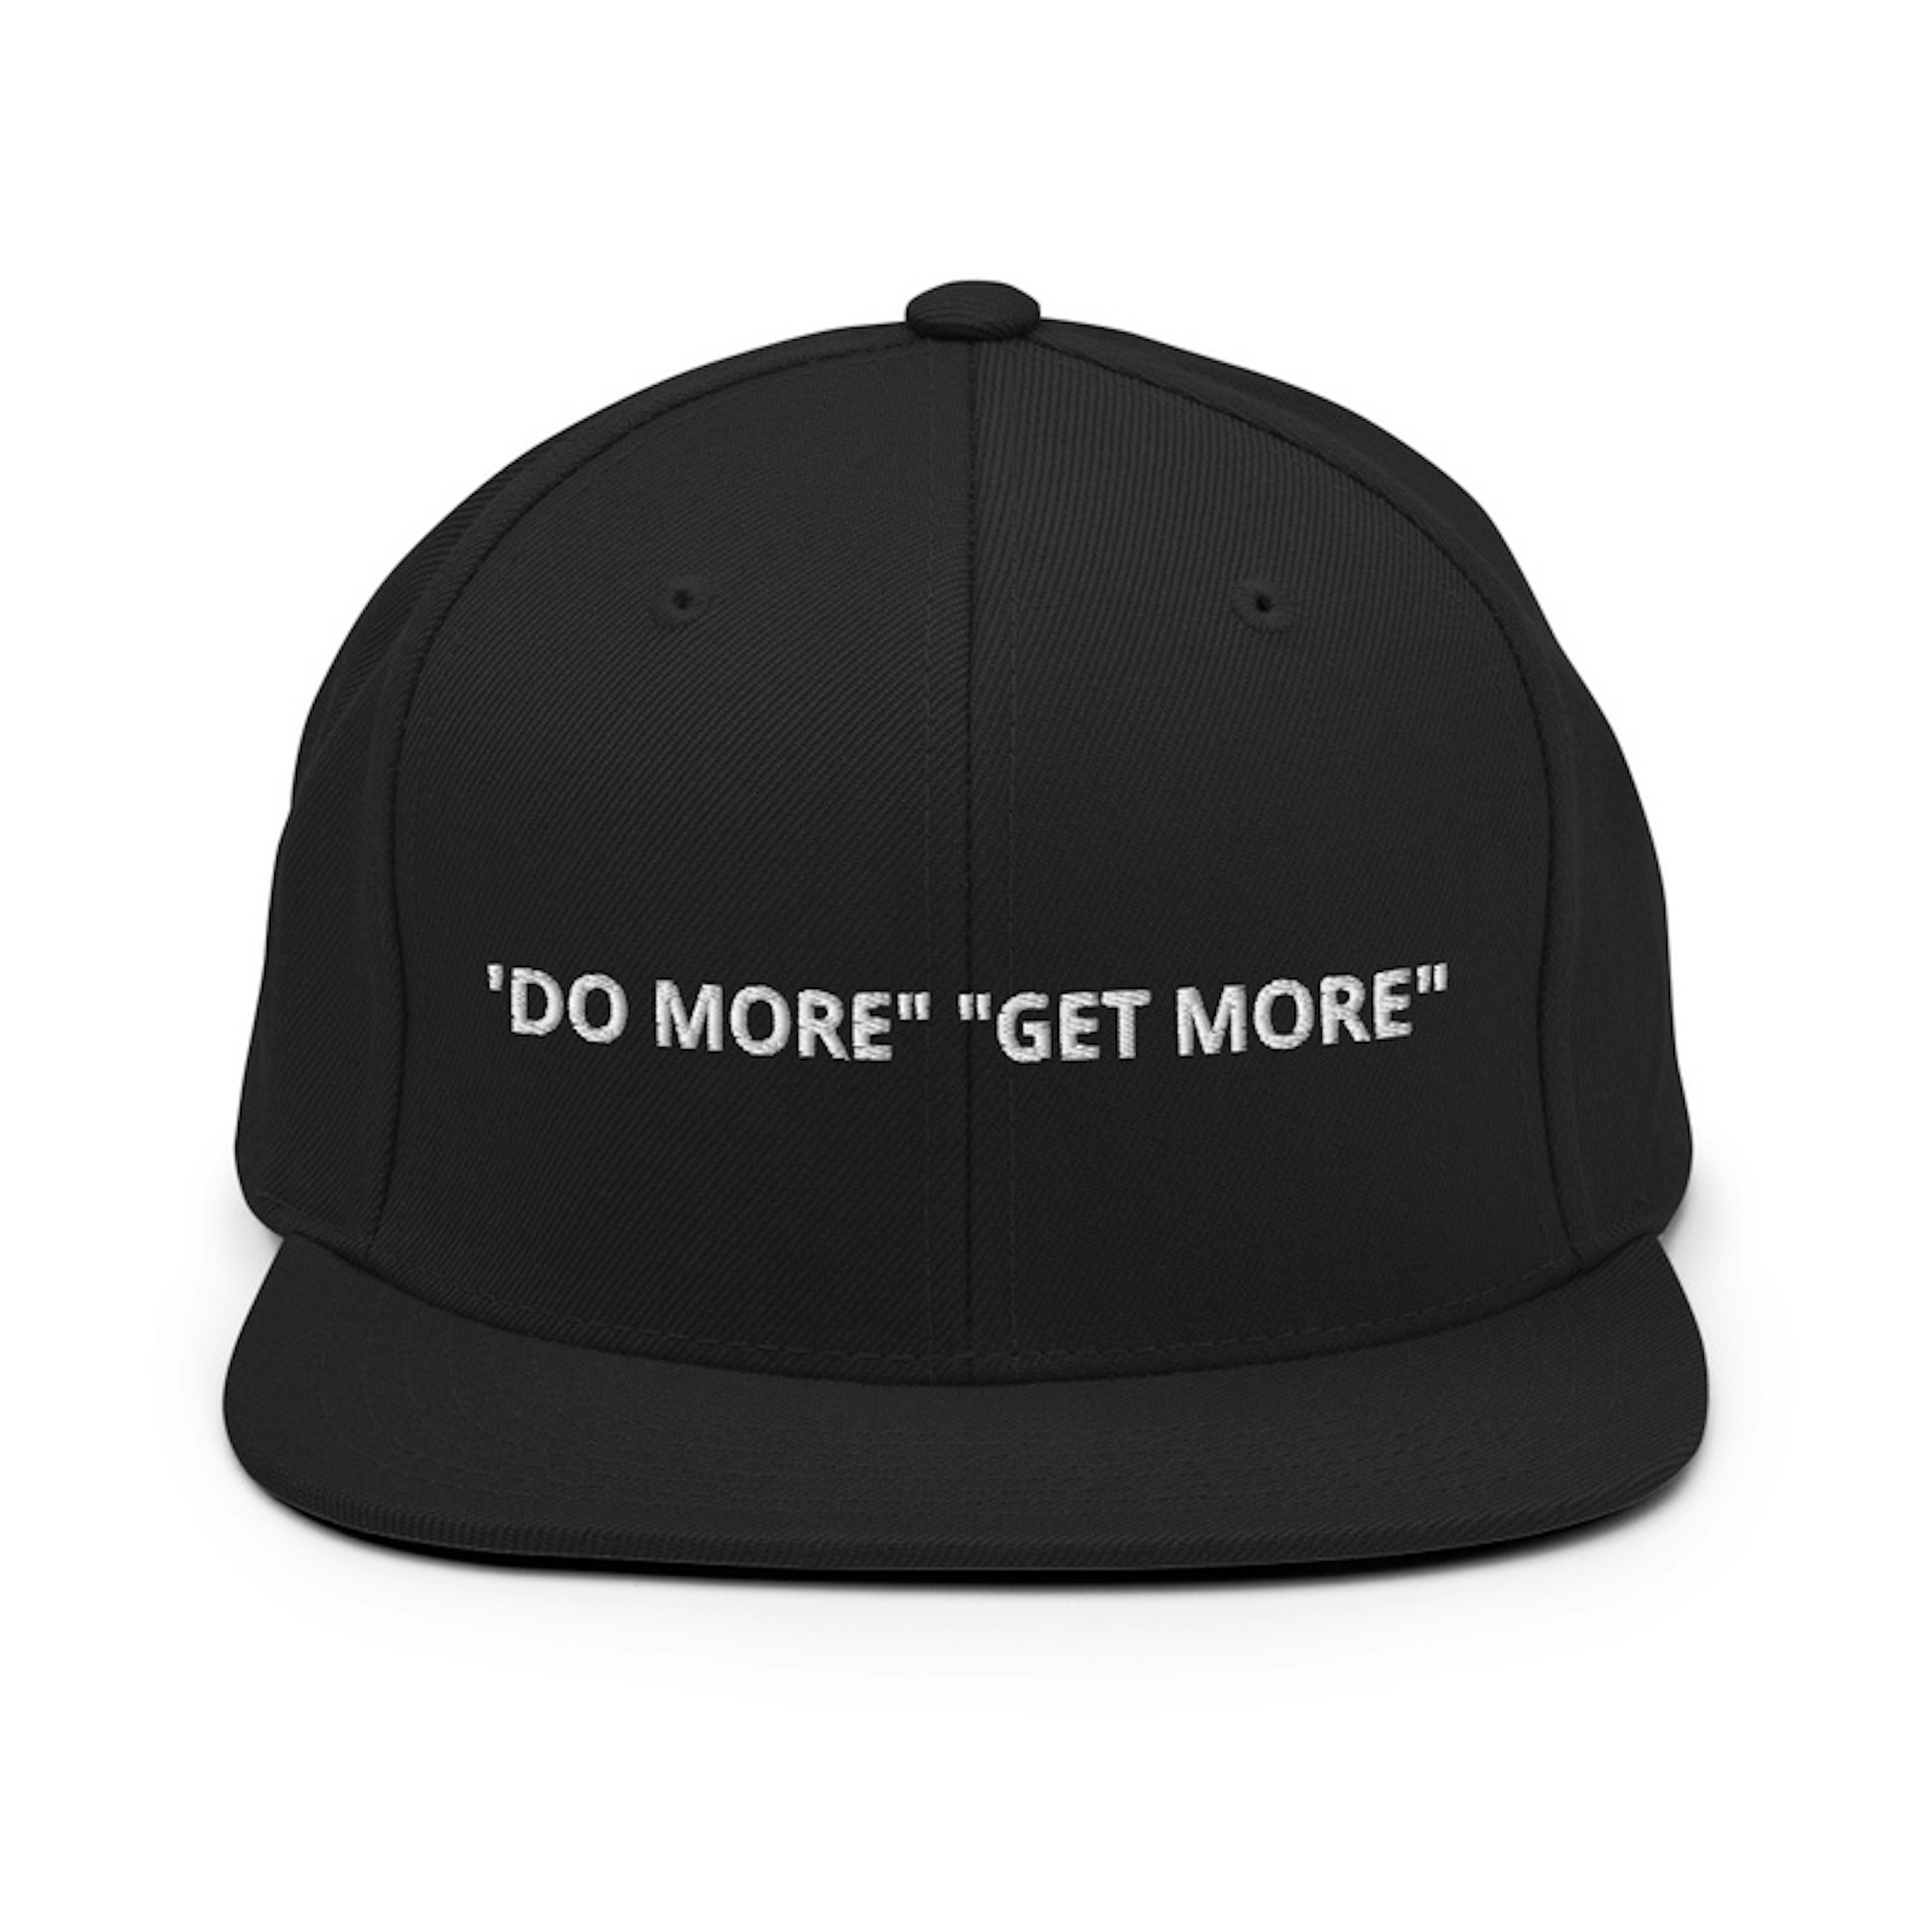 DO MORE GET MORE SNAP BACK